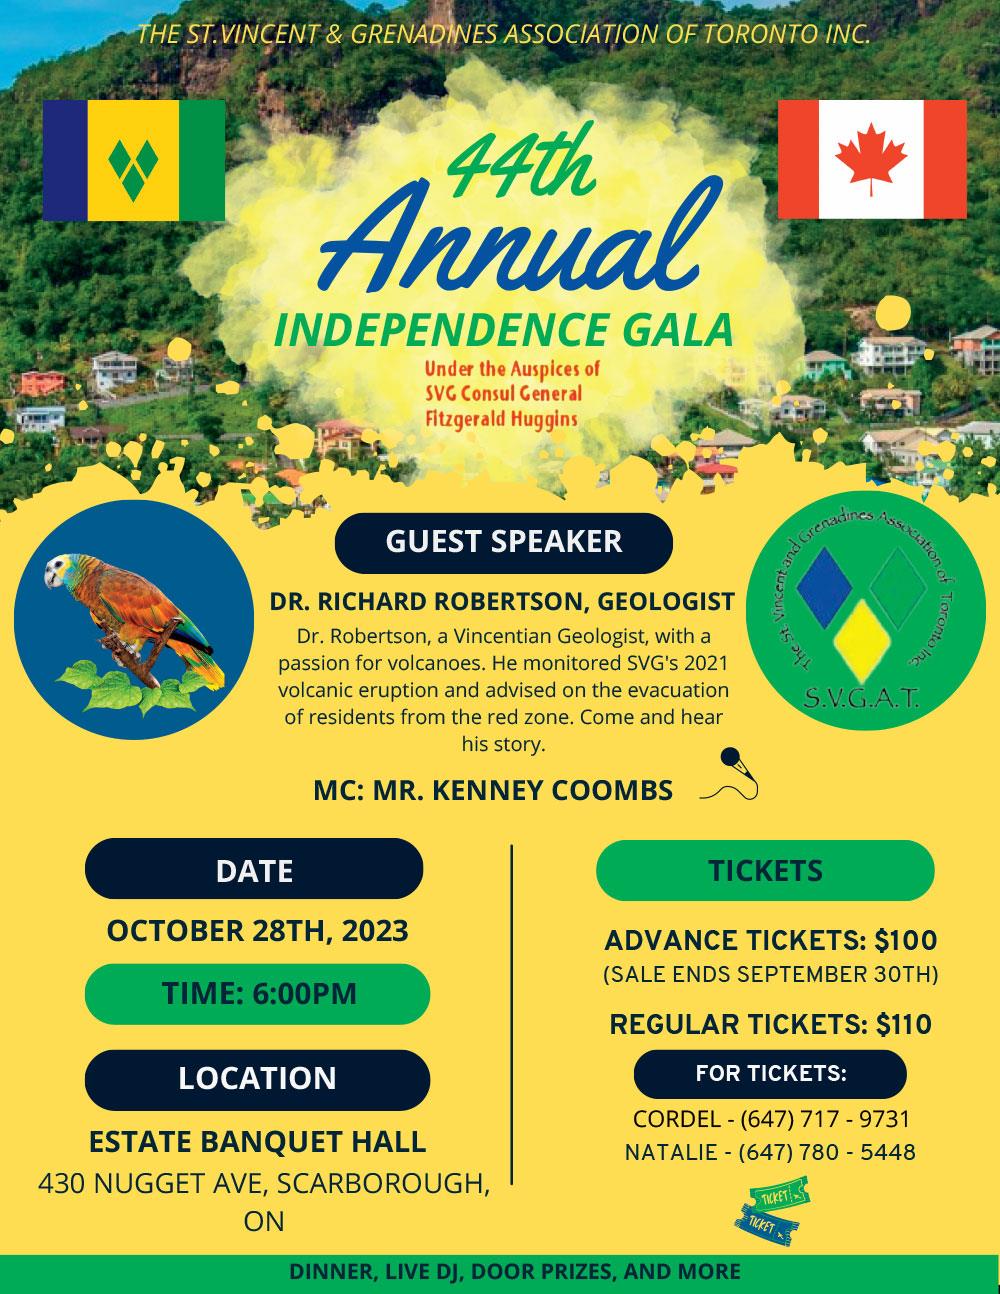 44th Annual Independence Gala